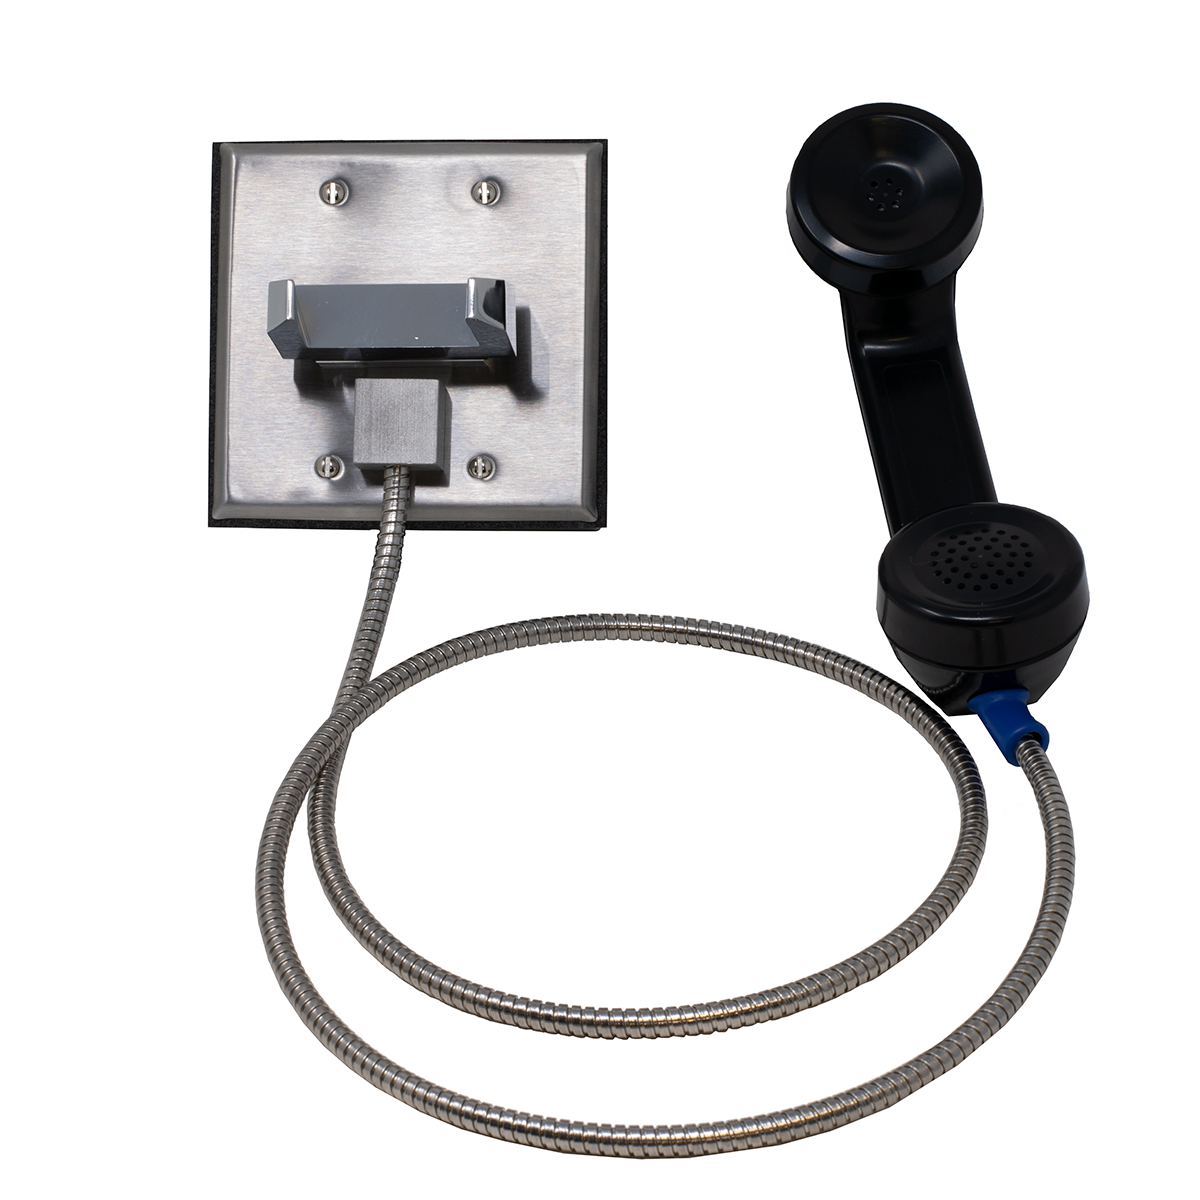 Outdoor Rated Telephone with Chrome Hookswitch (Front View)